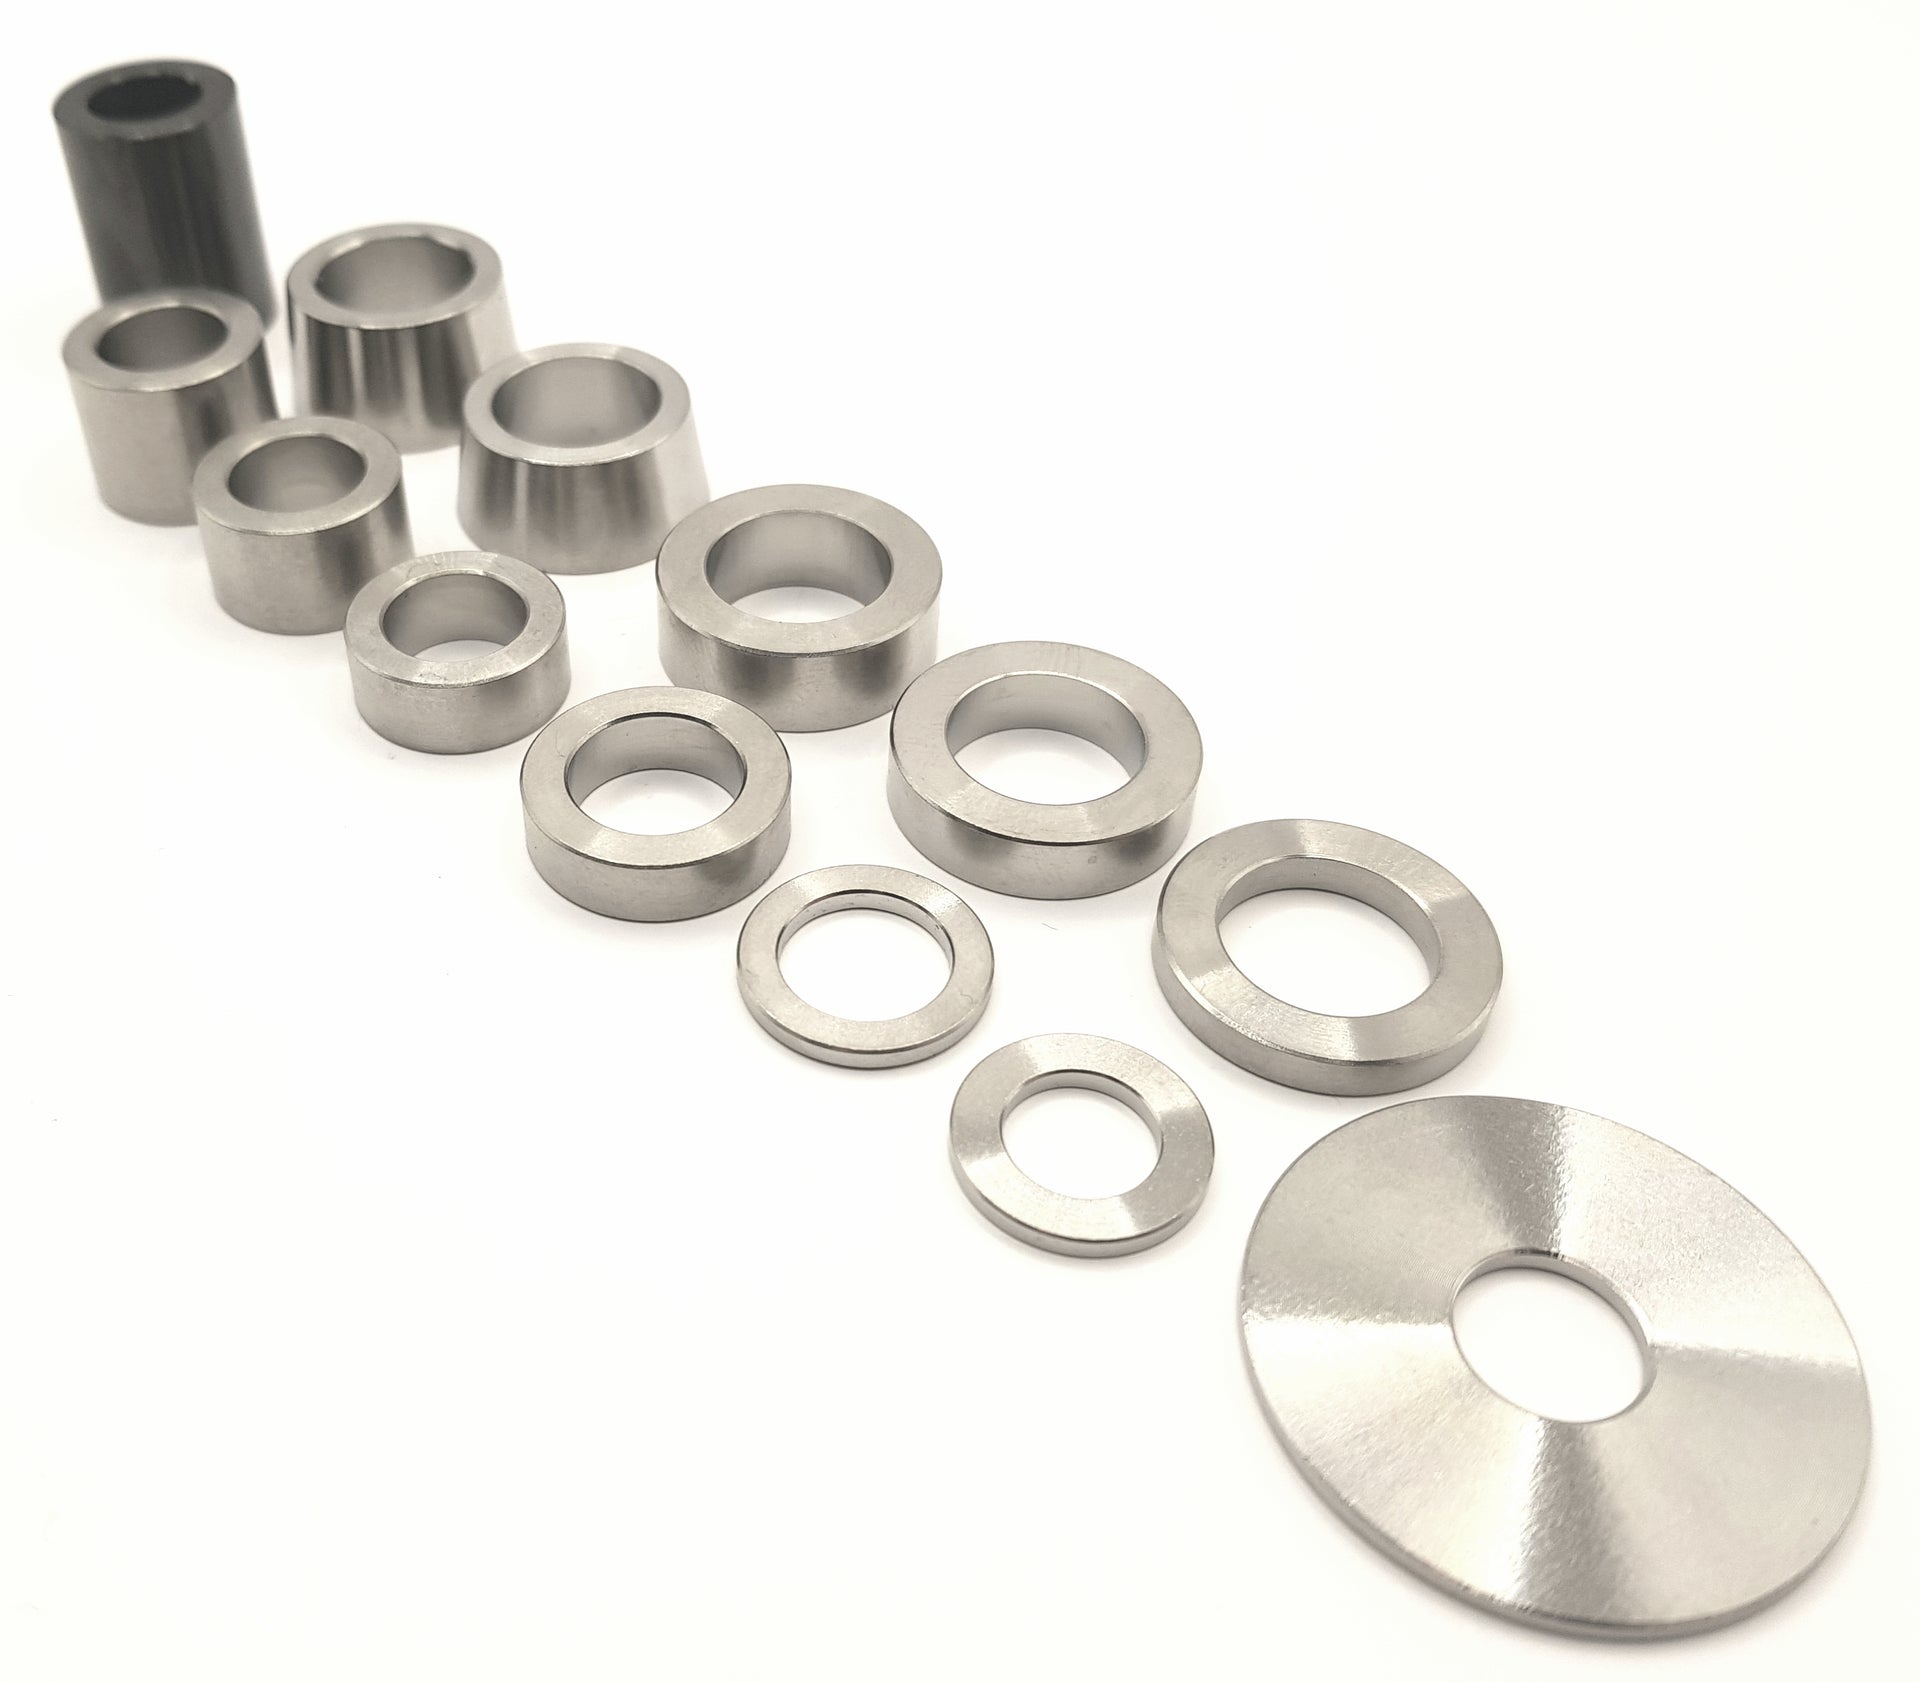 Spacers, Washers & Jam Nuts